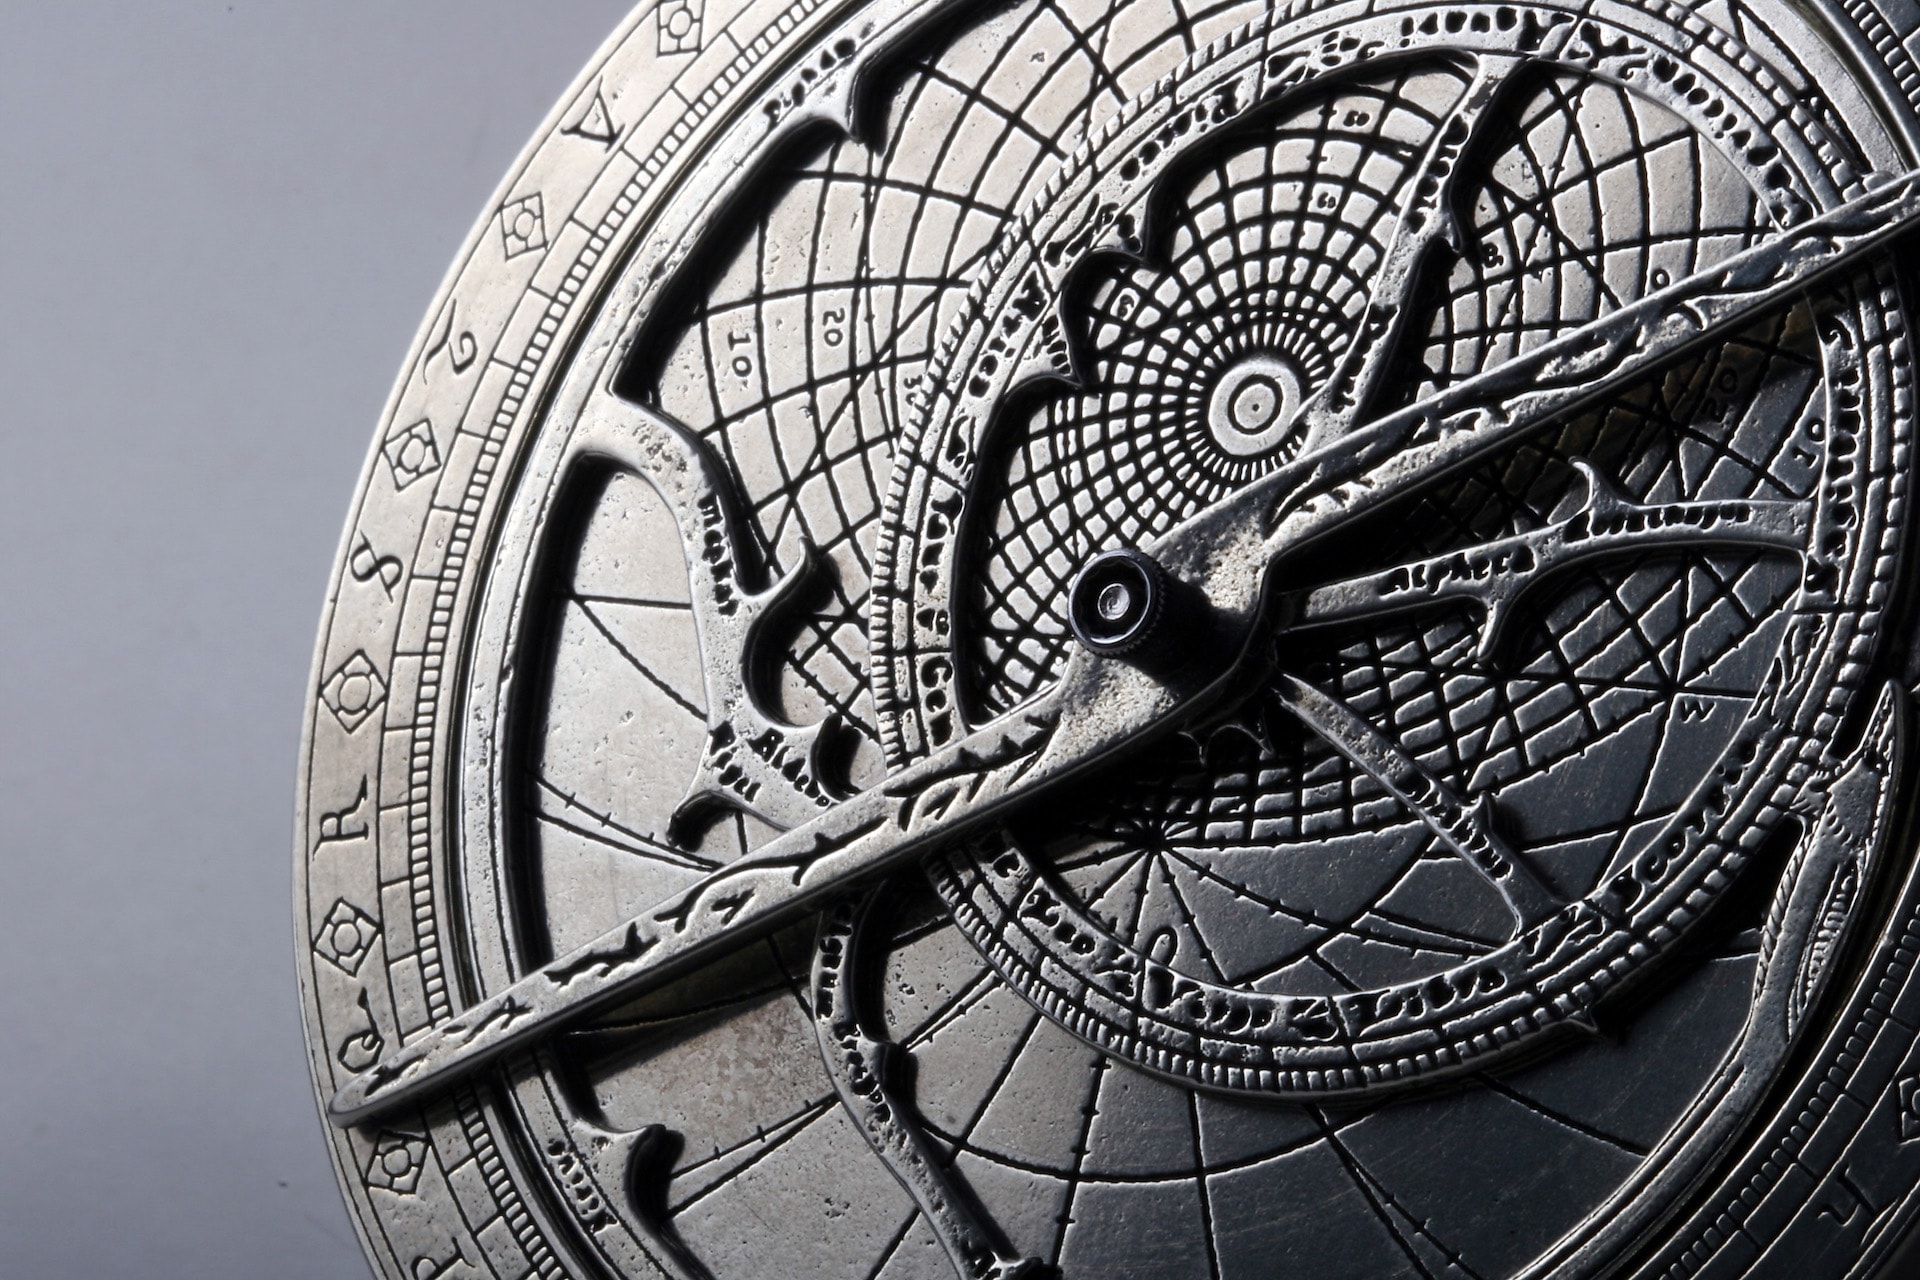 Astrolabe by Eric Jusino on Flick - https://www.flickr.com/photos/mangpages/2055173873